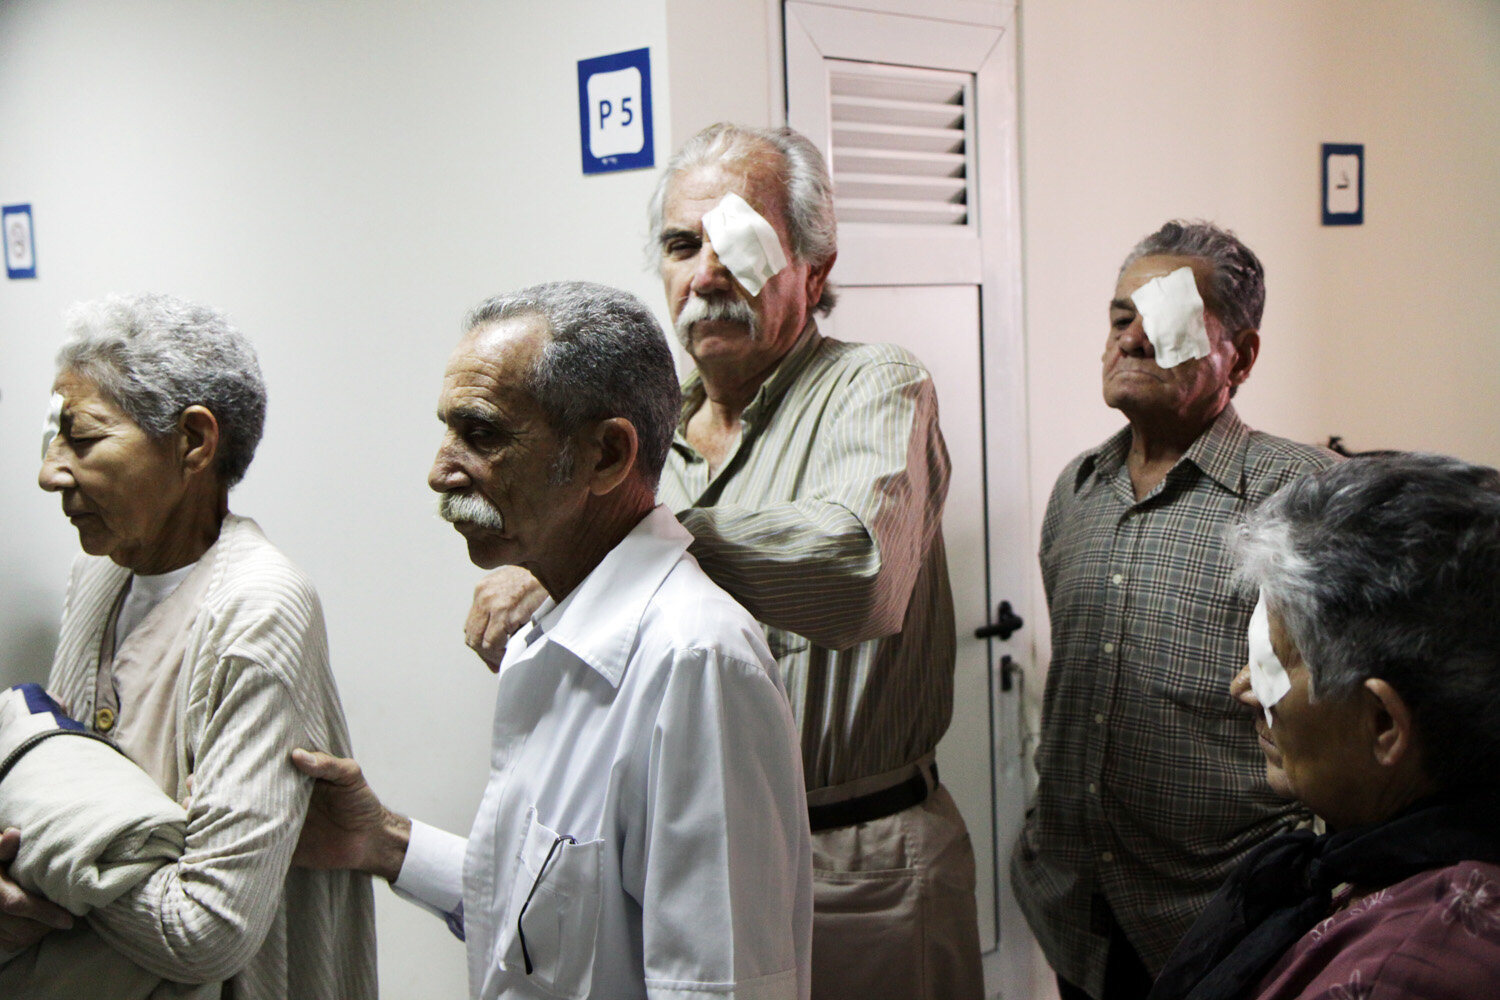  Patients are on their way home after their cataract surgery as part of Cuba´s and Venezuela´s joint program Operacion Milagro, Operation Miracle.  